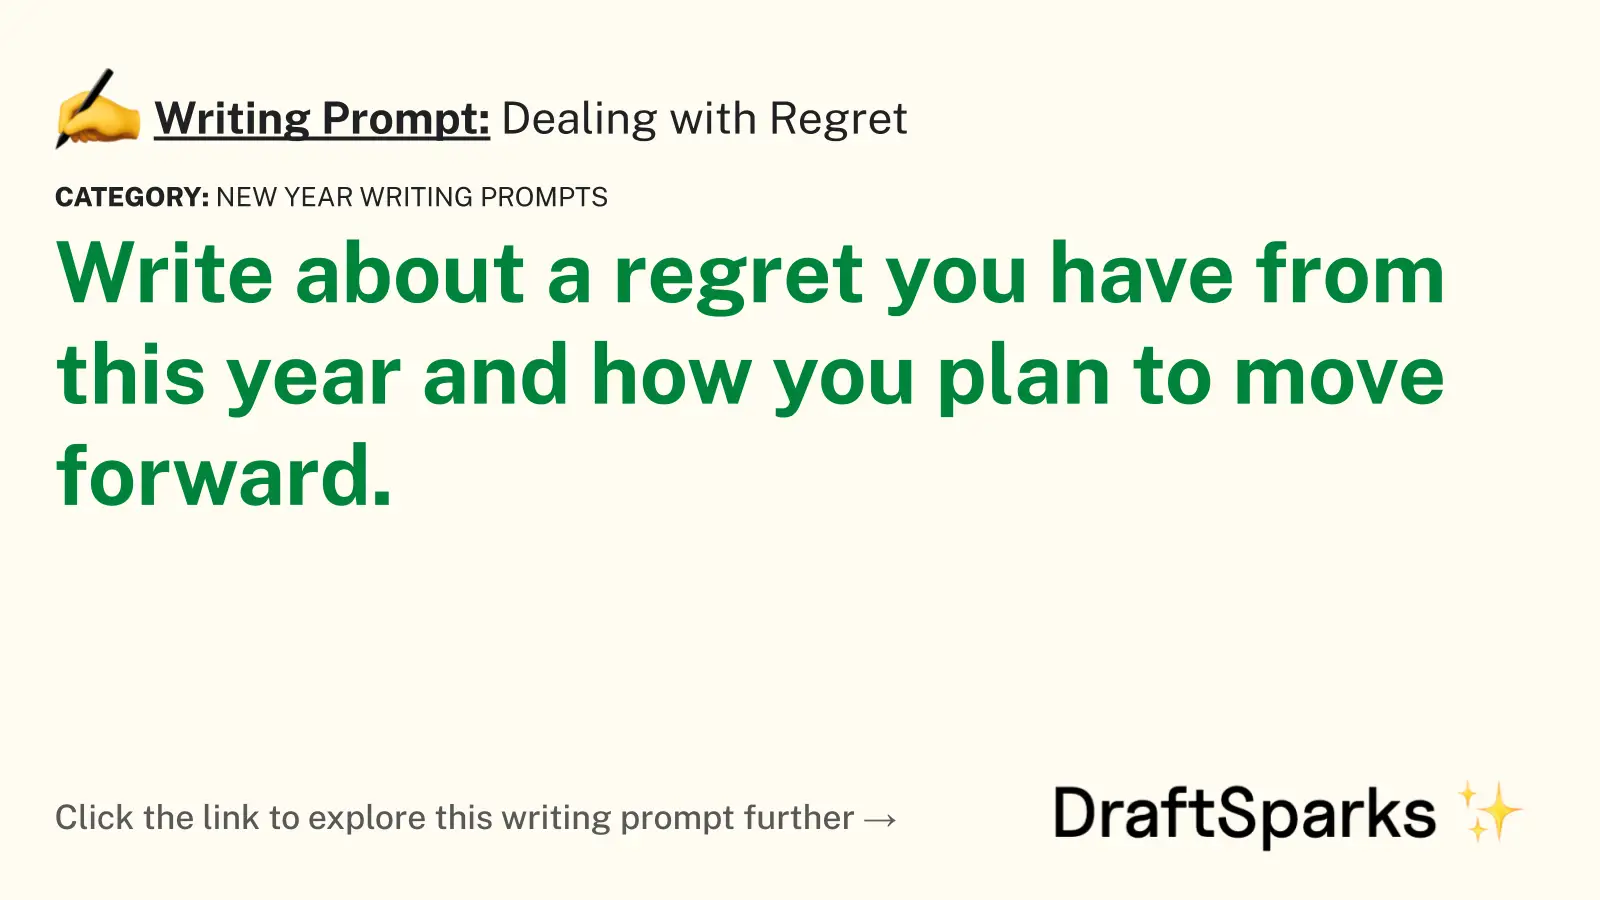 Dealing with Regret